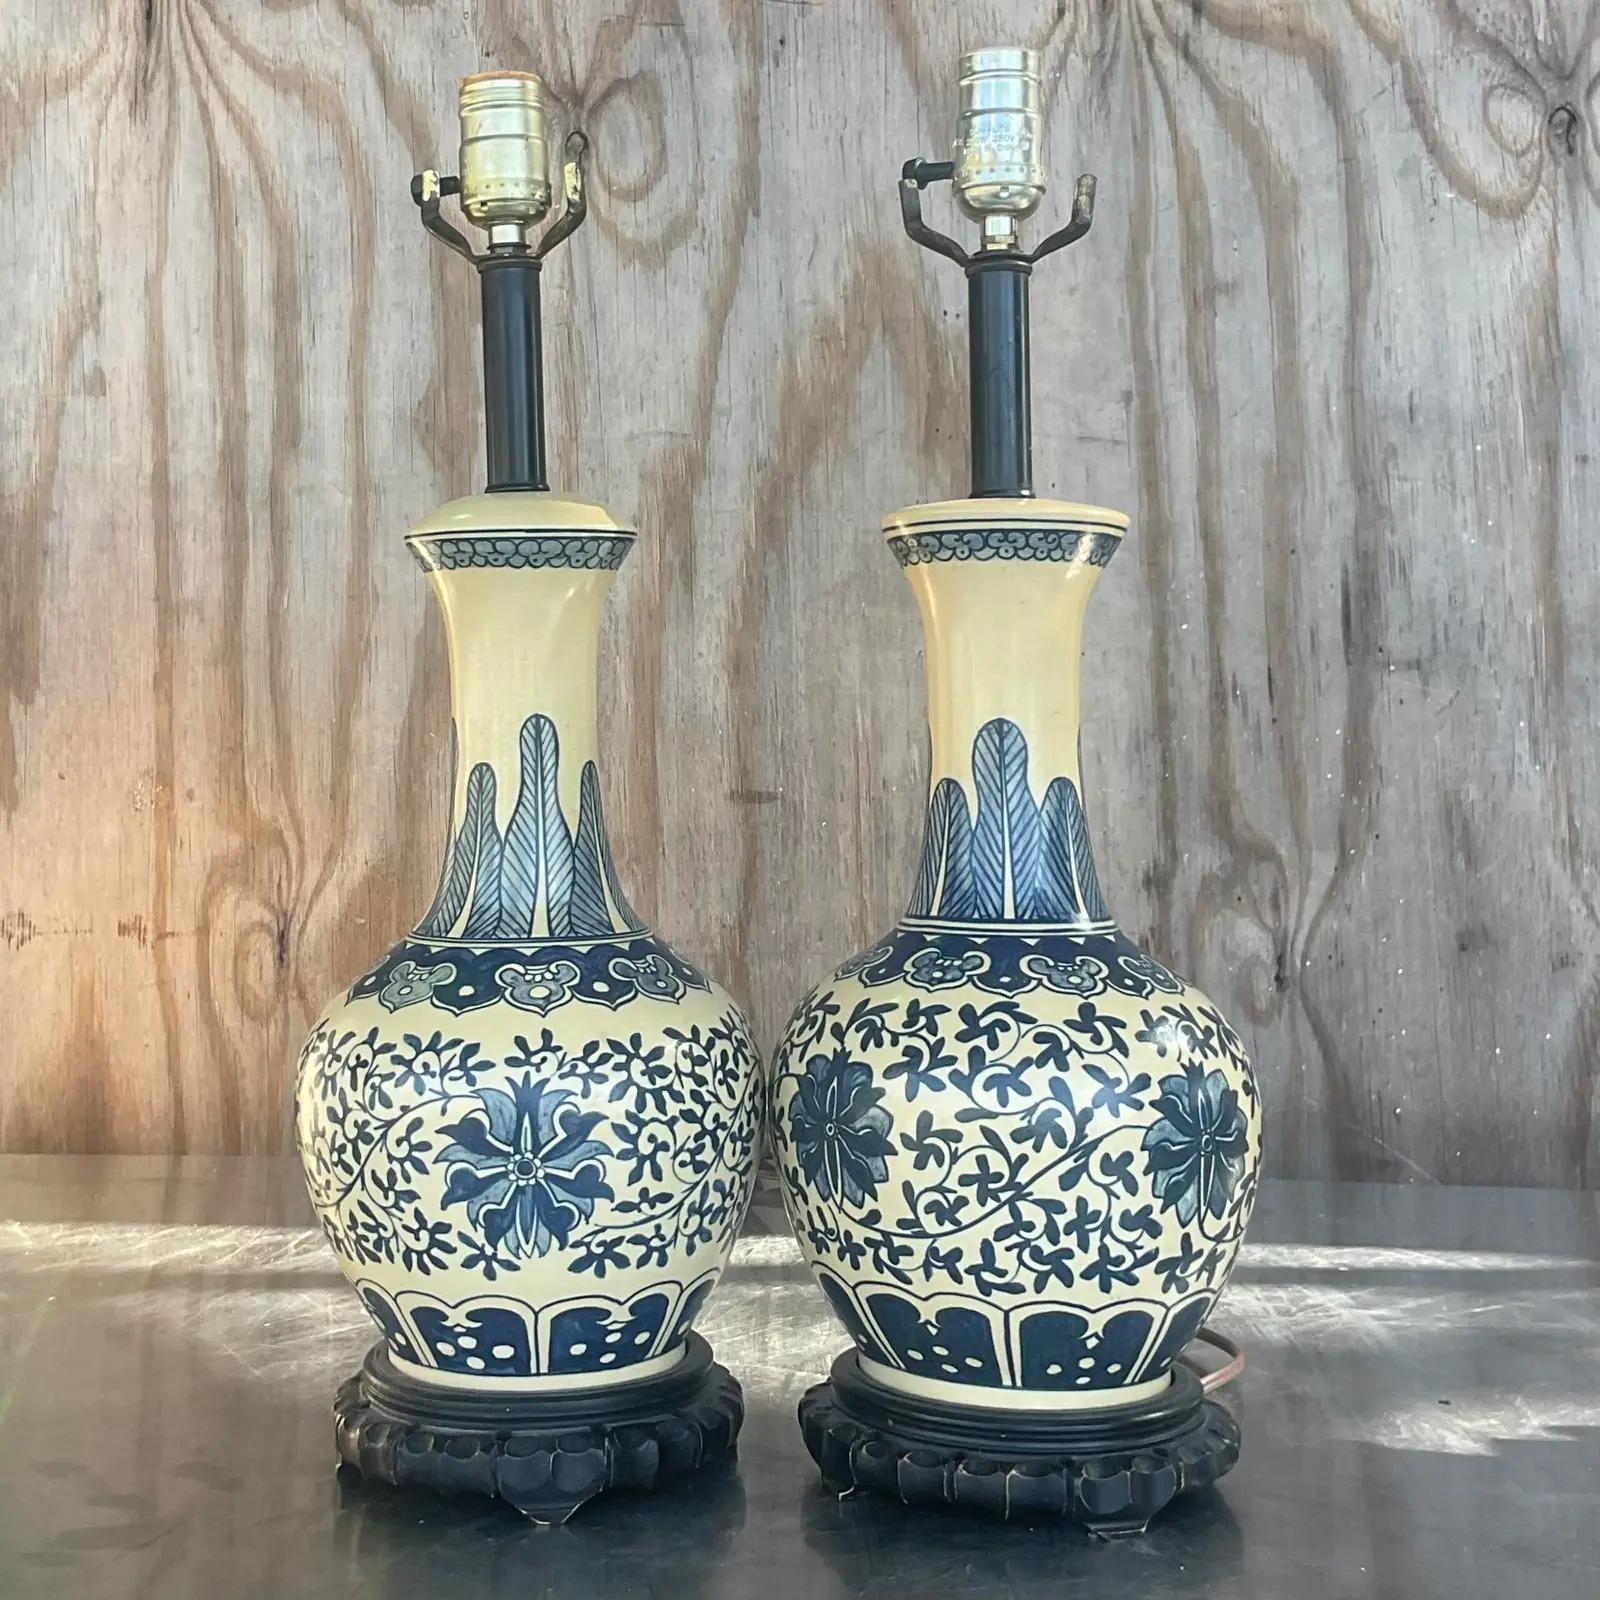 Vintage Boho Chic Hand Painted Gourd Lamps - a Pair In Good Condition For Sale In west palm beach, FL